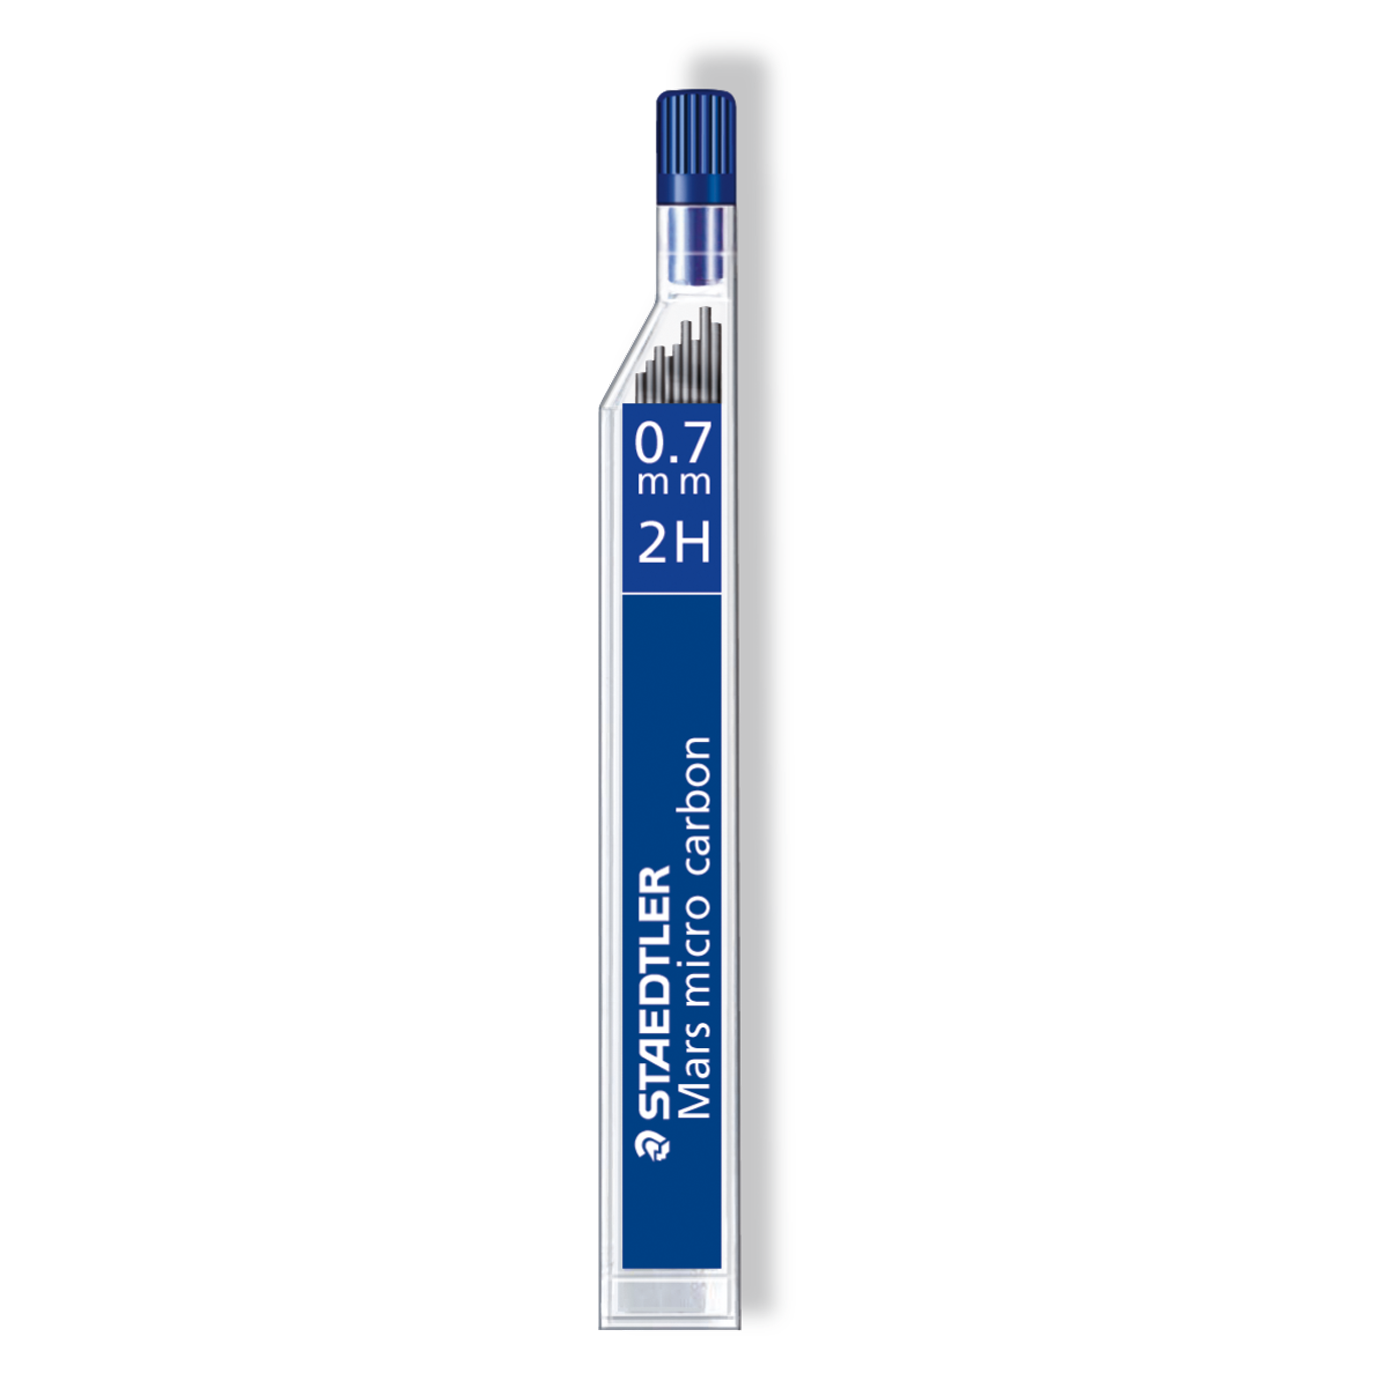 Staedtler Mechanical Pencil Leads Refill 0.7 mm Mars Micro Tube of 12 2H